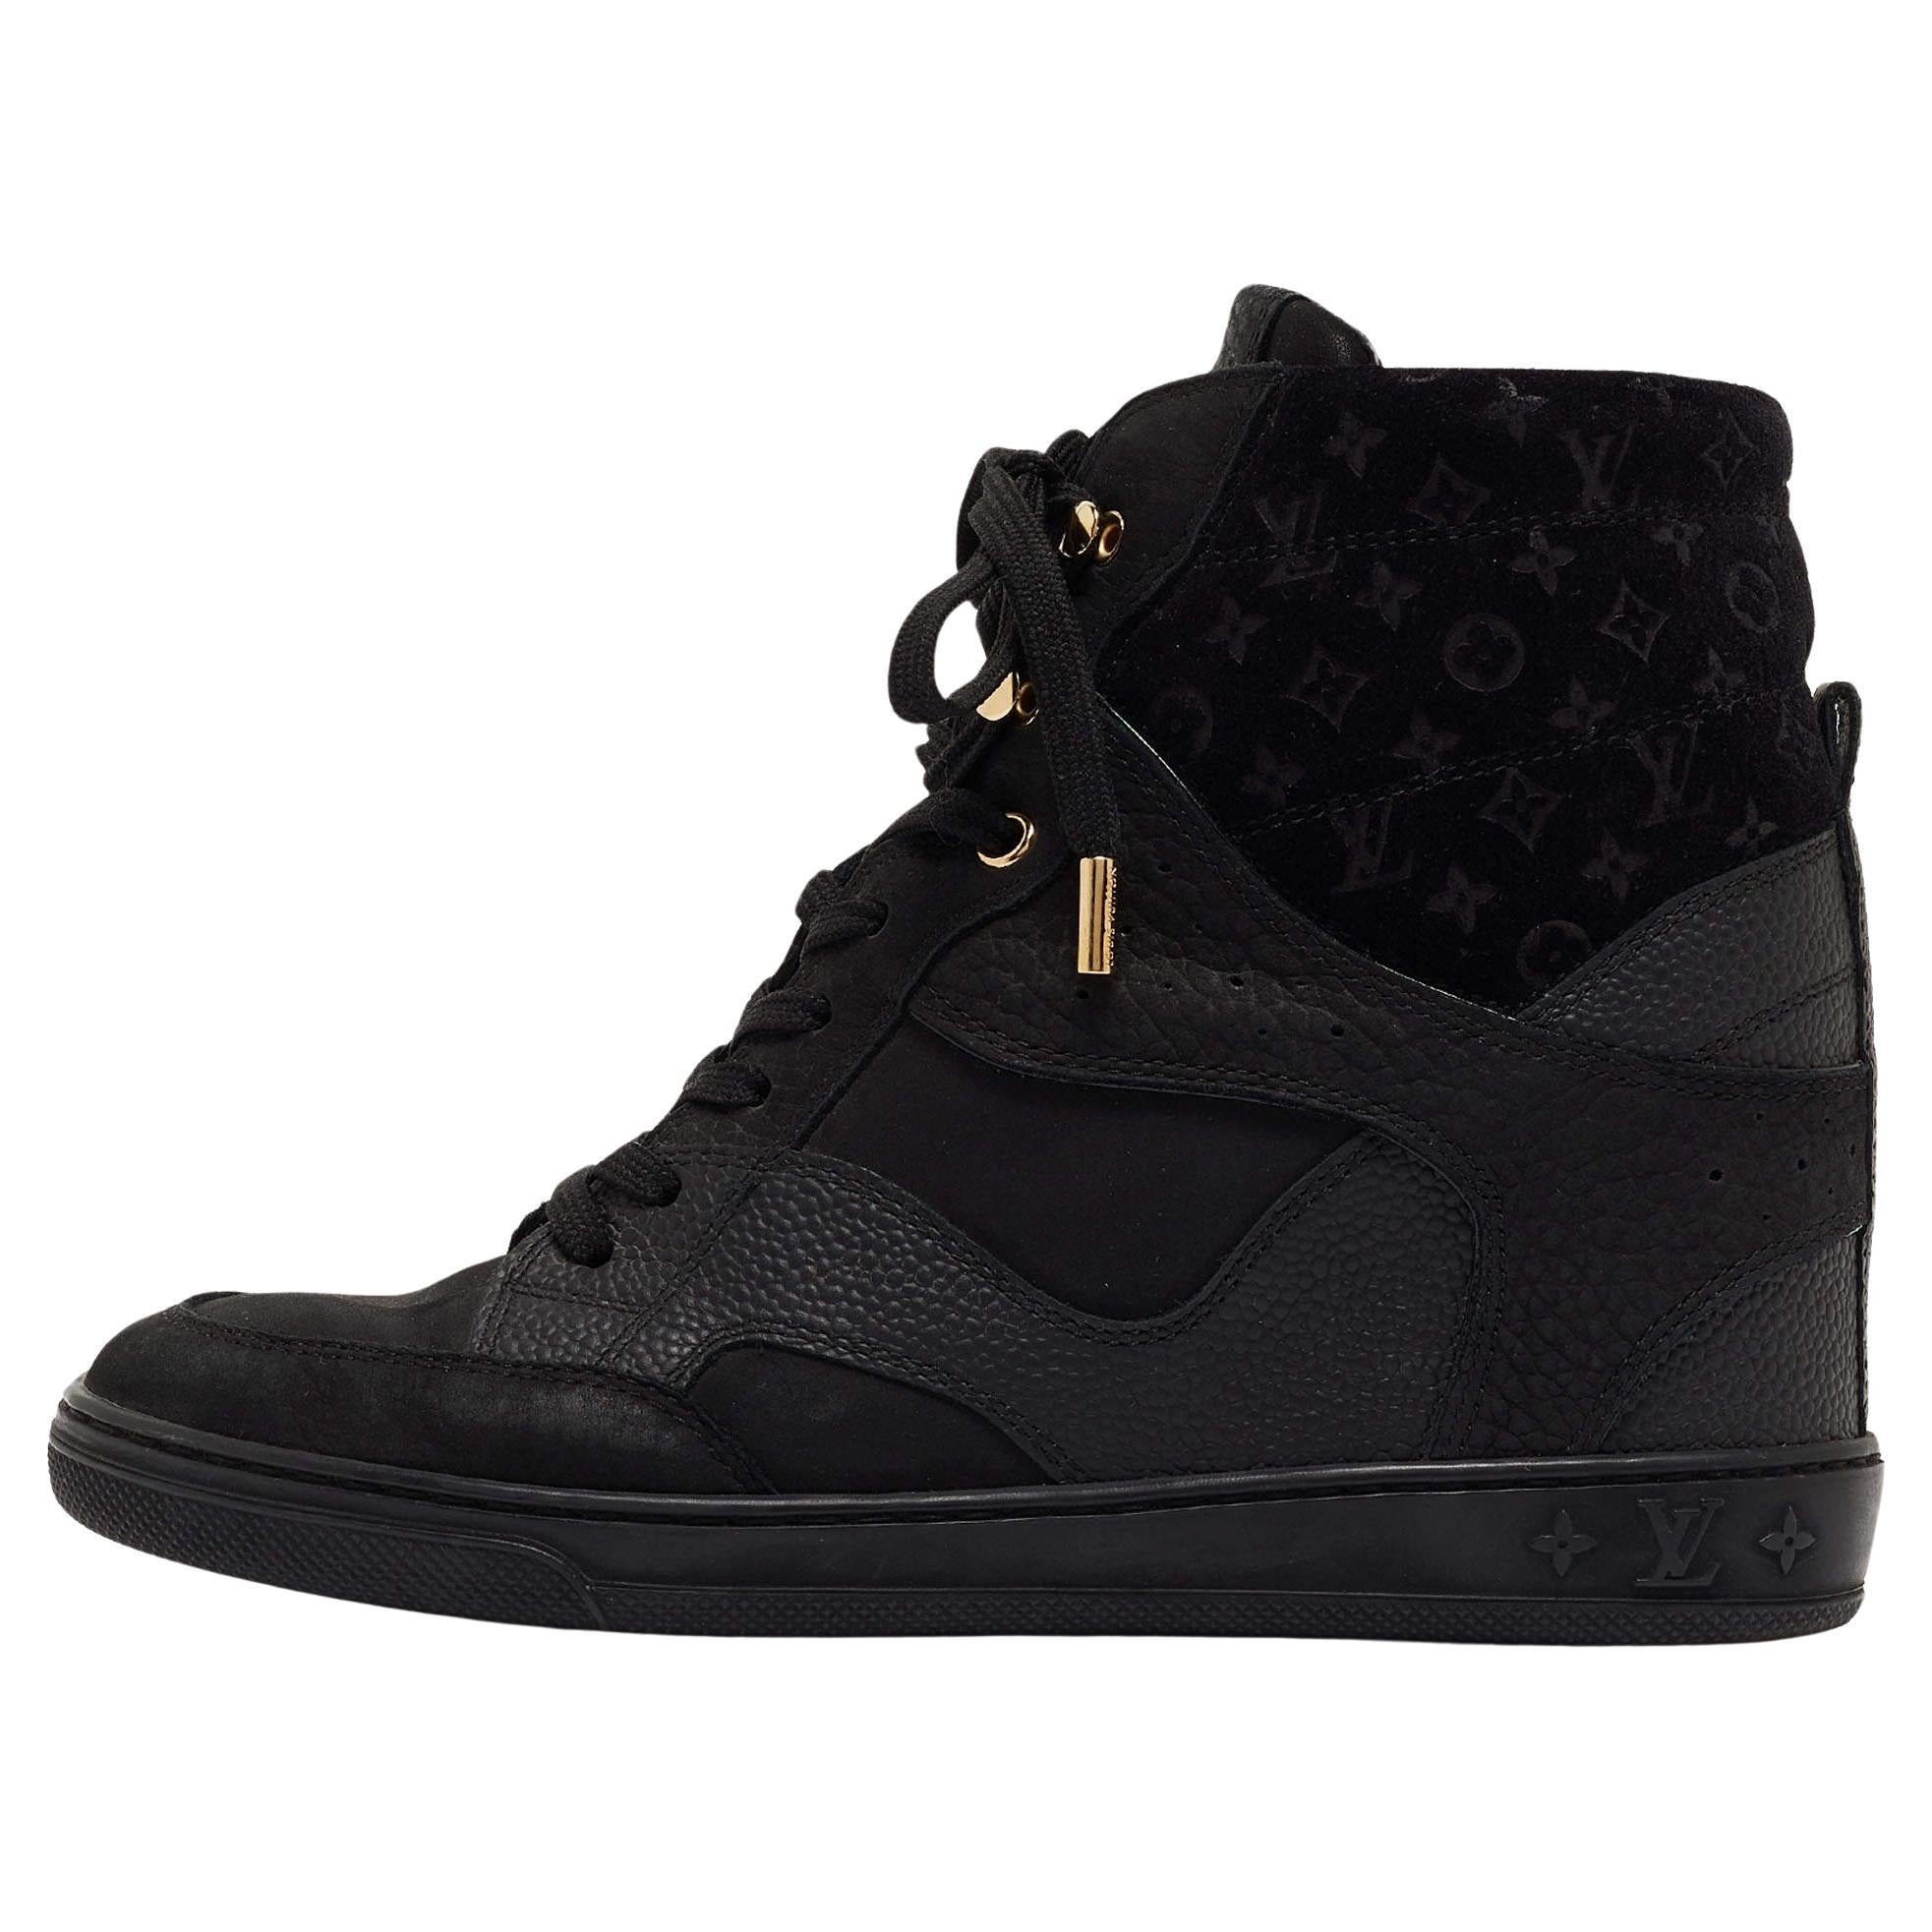 Louis Vuitton Black Leather and Monogram Suede Cliff Wedge Sneakers Size 37 For Sale